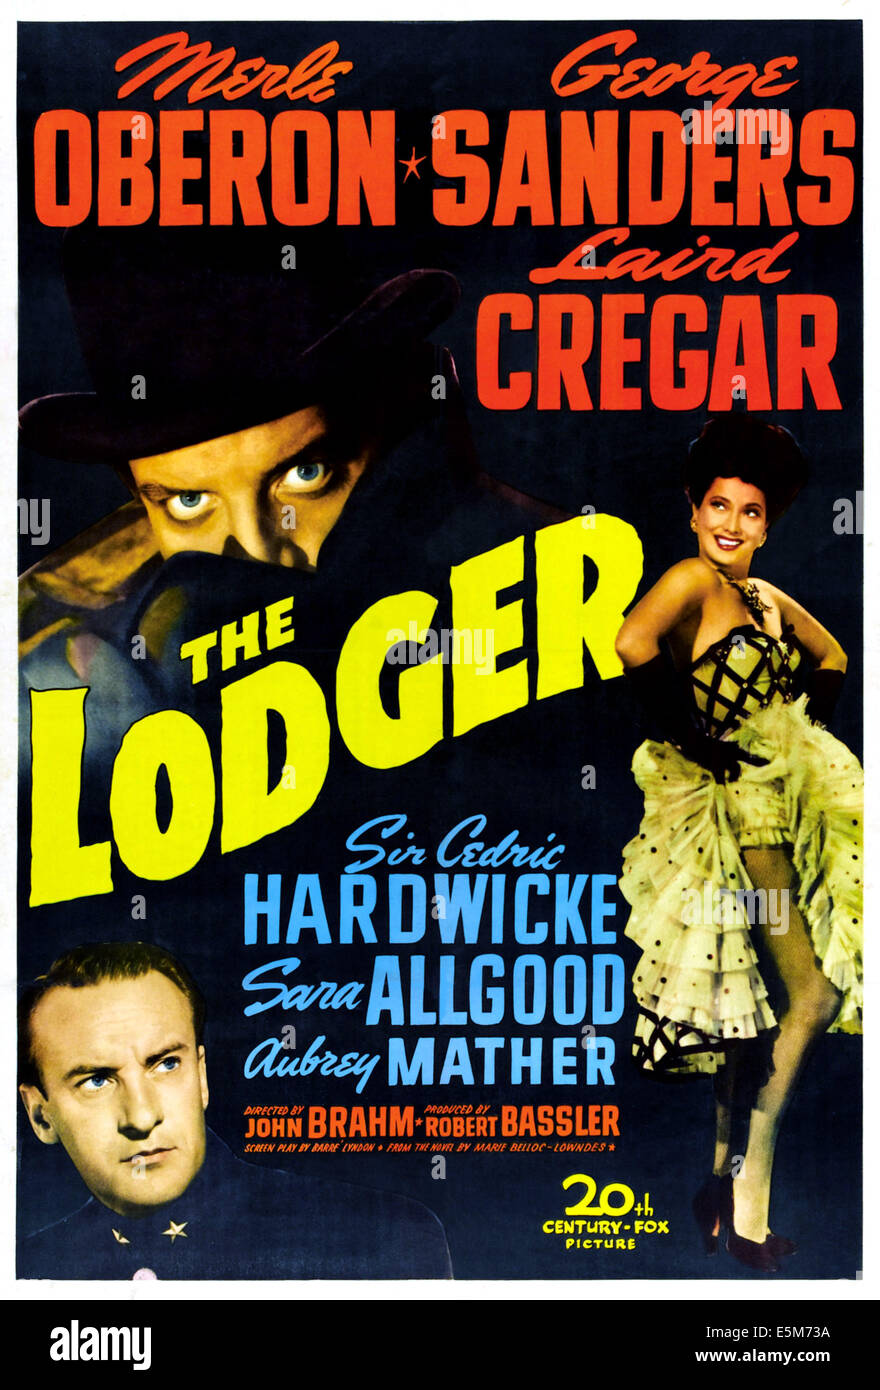 THE LODGER, George Sanders, Laird Cregar, Merle Oberon, 1944, TM and Copyright (c) 20th Century-Fox Film Corp.  All Rights Stock Photo